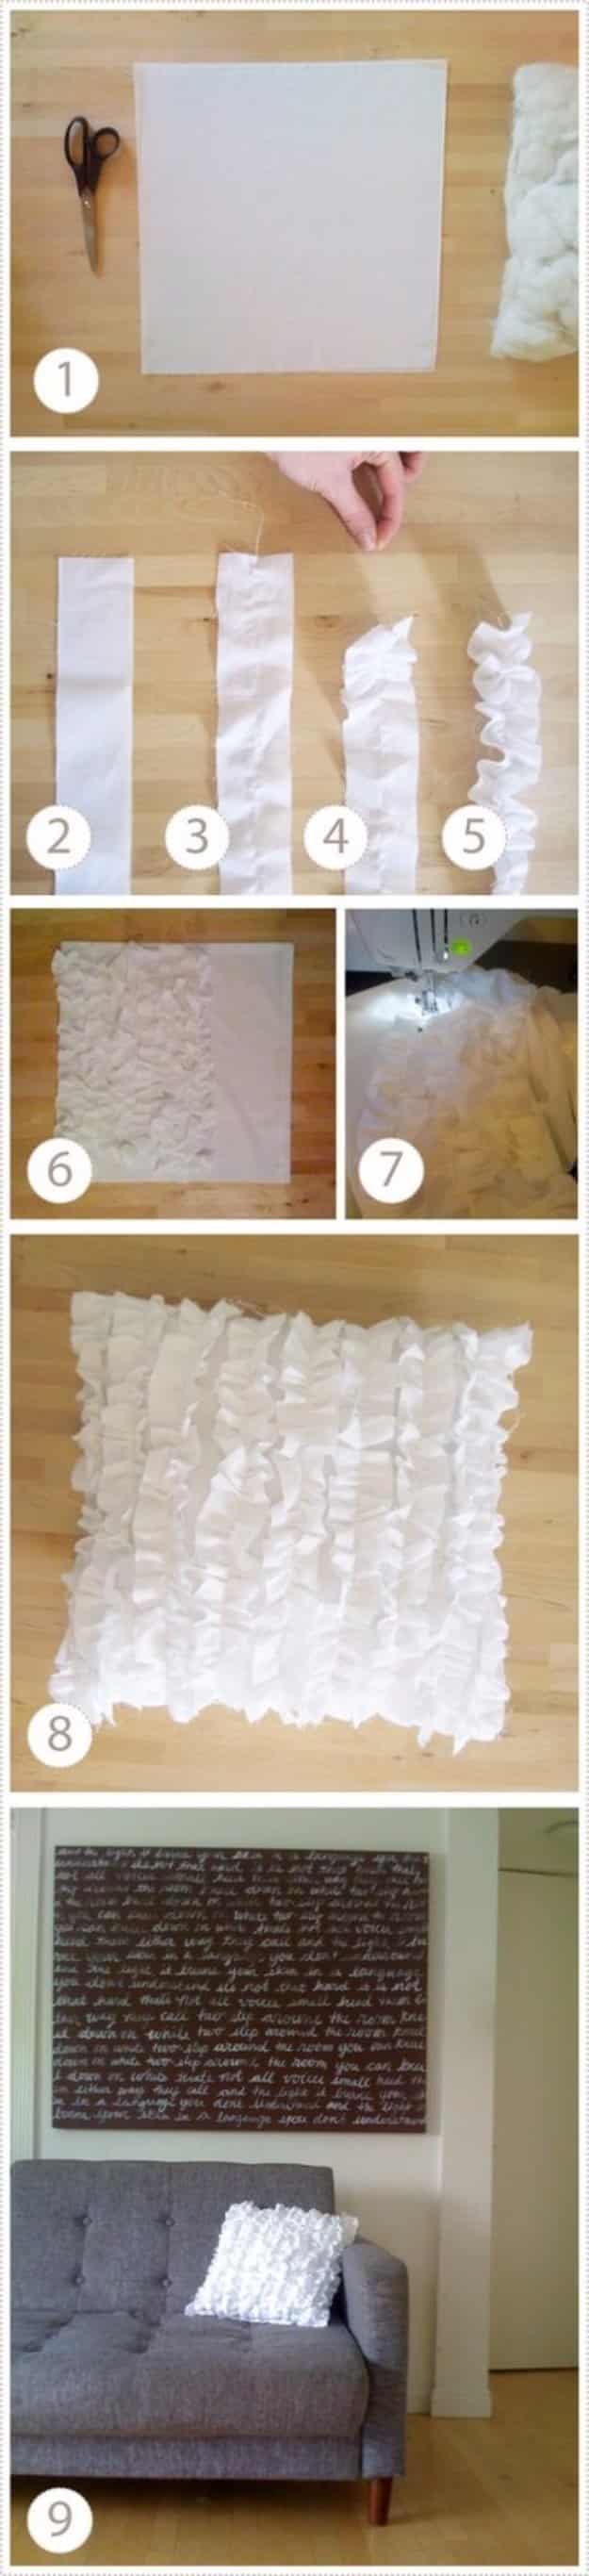 DIY Pillows and Creative Pillow Projects - Lovely Ruffle Pillow DIY - Decorative Cases and Covers, Throw Pillows, Cute and Easy Tutorials for Making Crafty Home Decor - Sewing Tutorials and No Sew Ideas